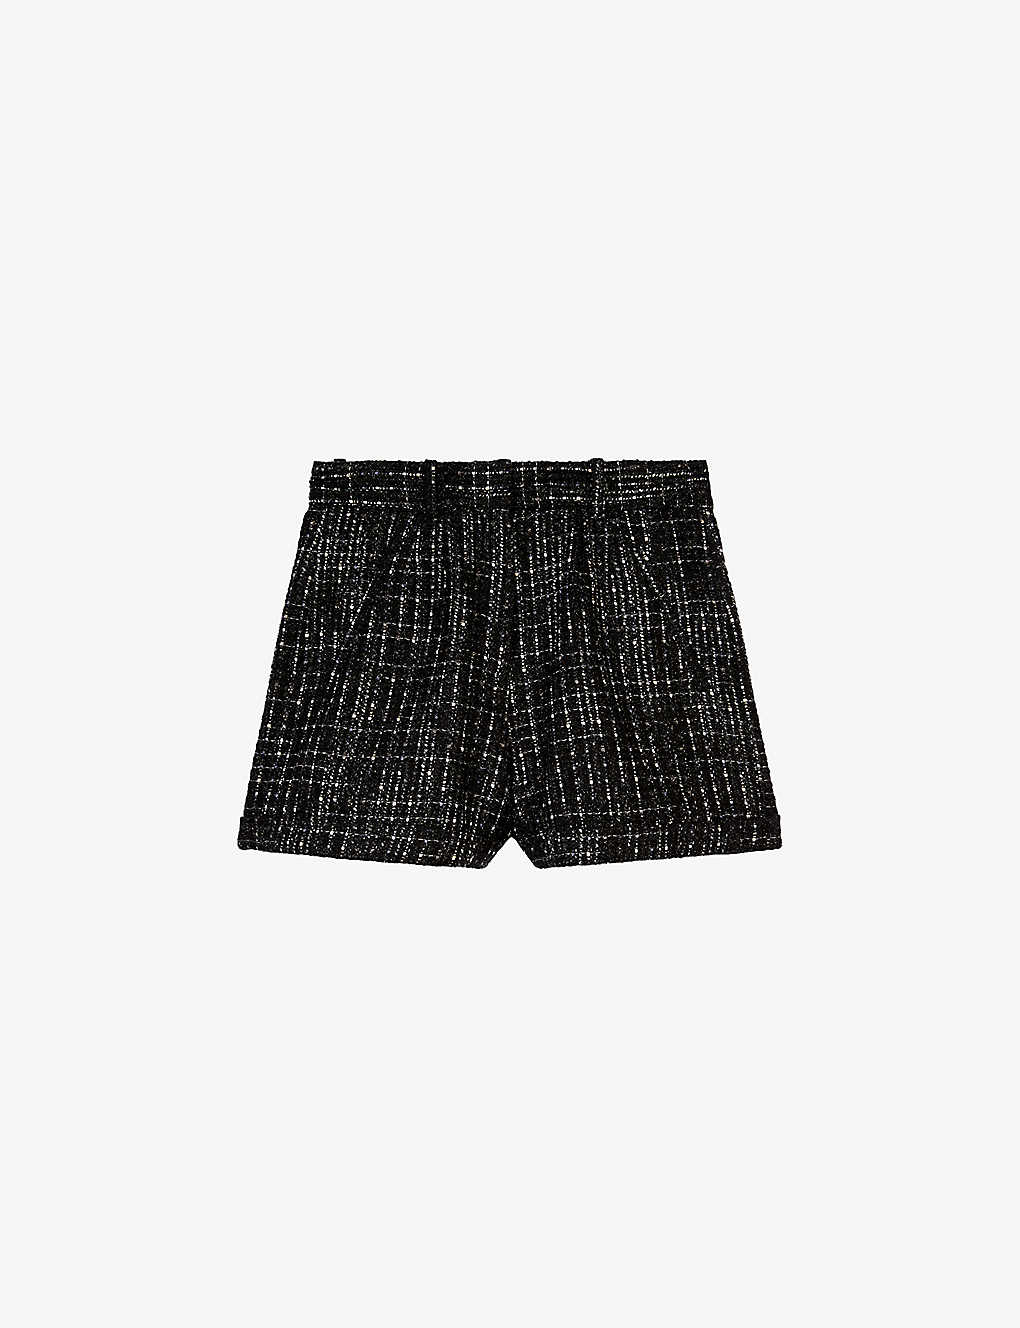 Shop The Kooples Women's Black White Textured-weave High-waisted Tweed Shorts